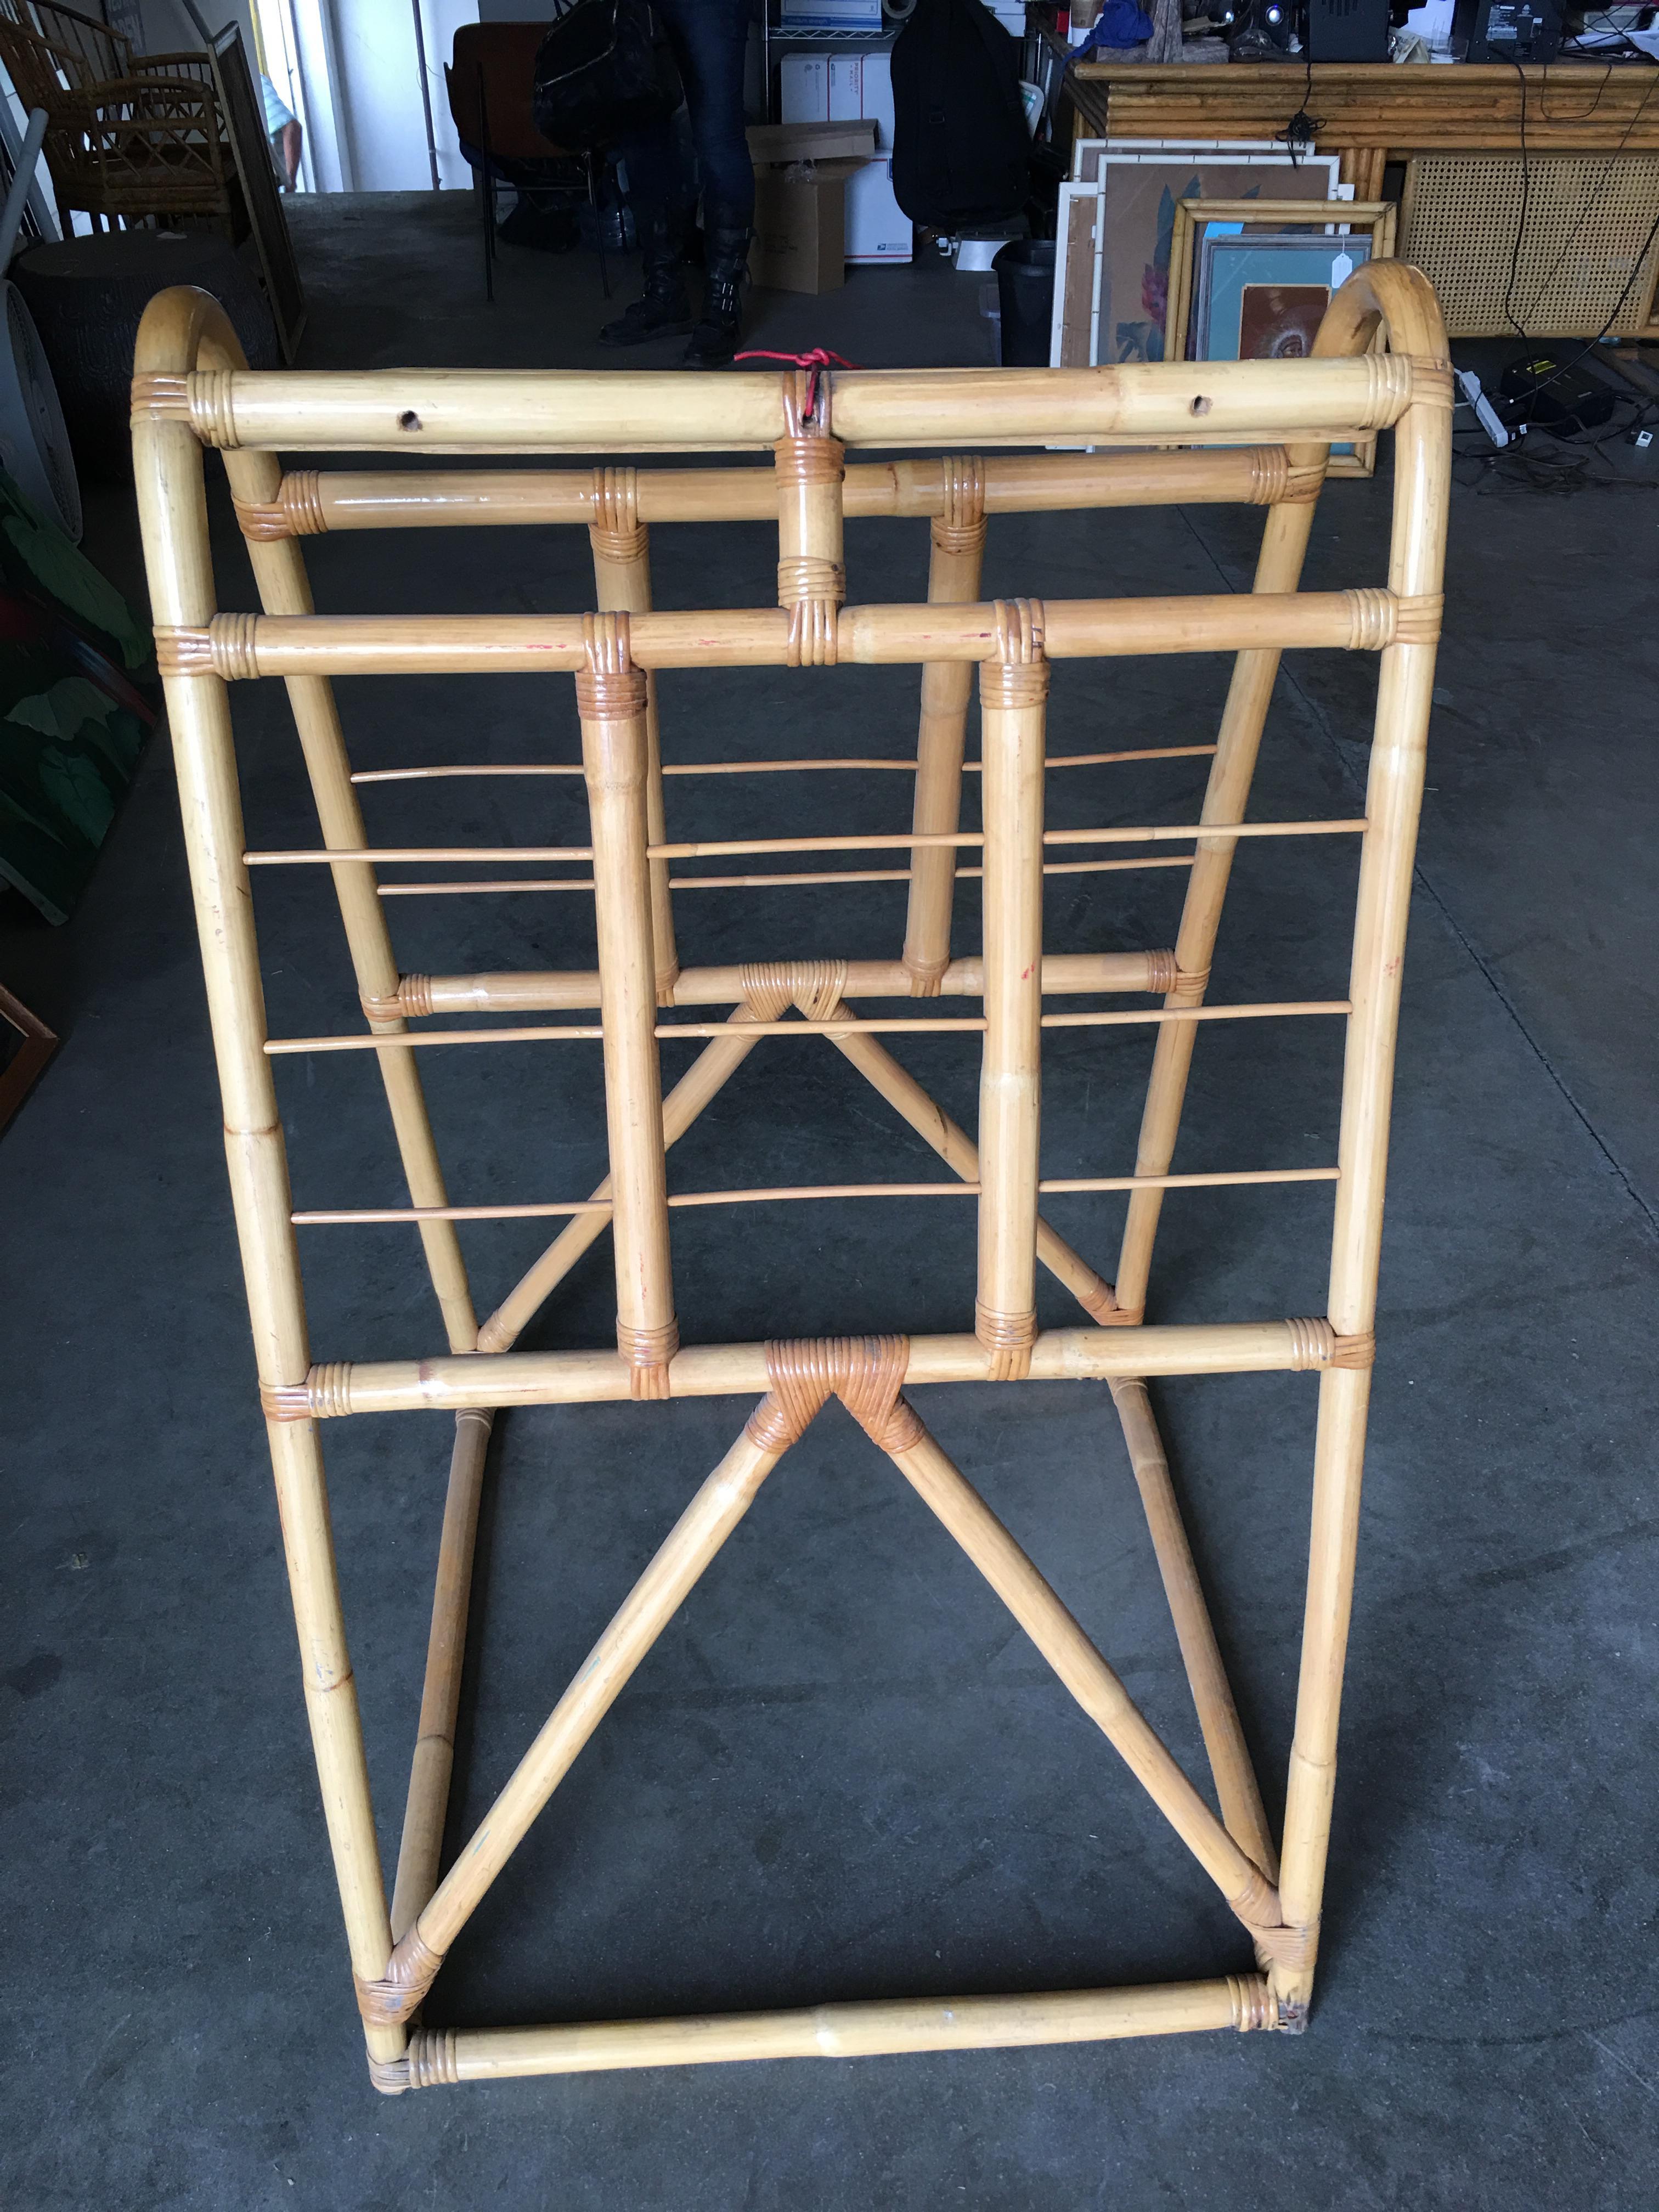 amish clothes drying rack plans